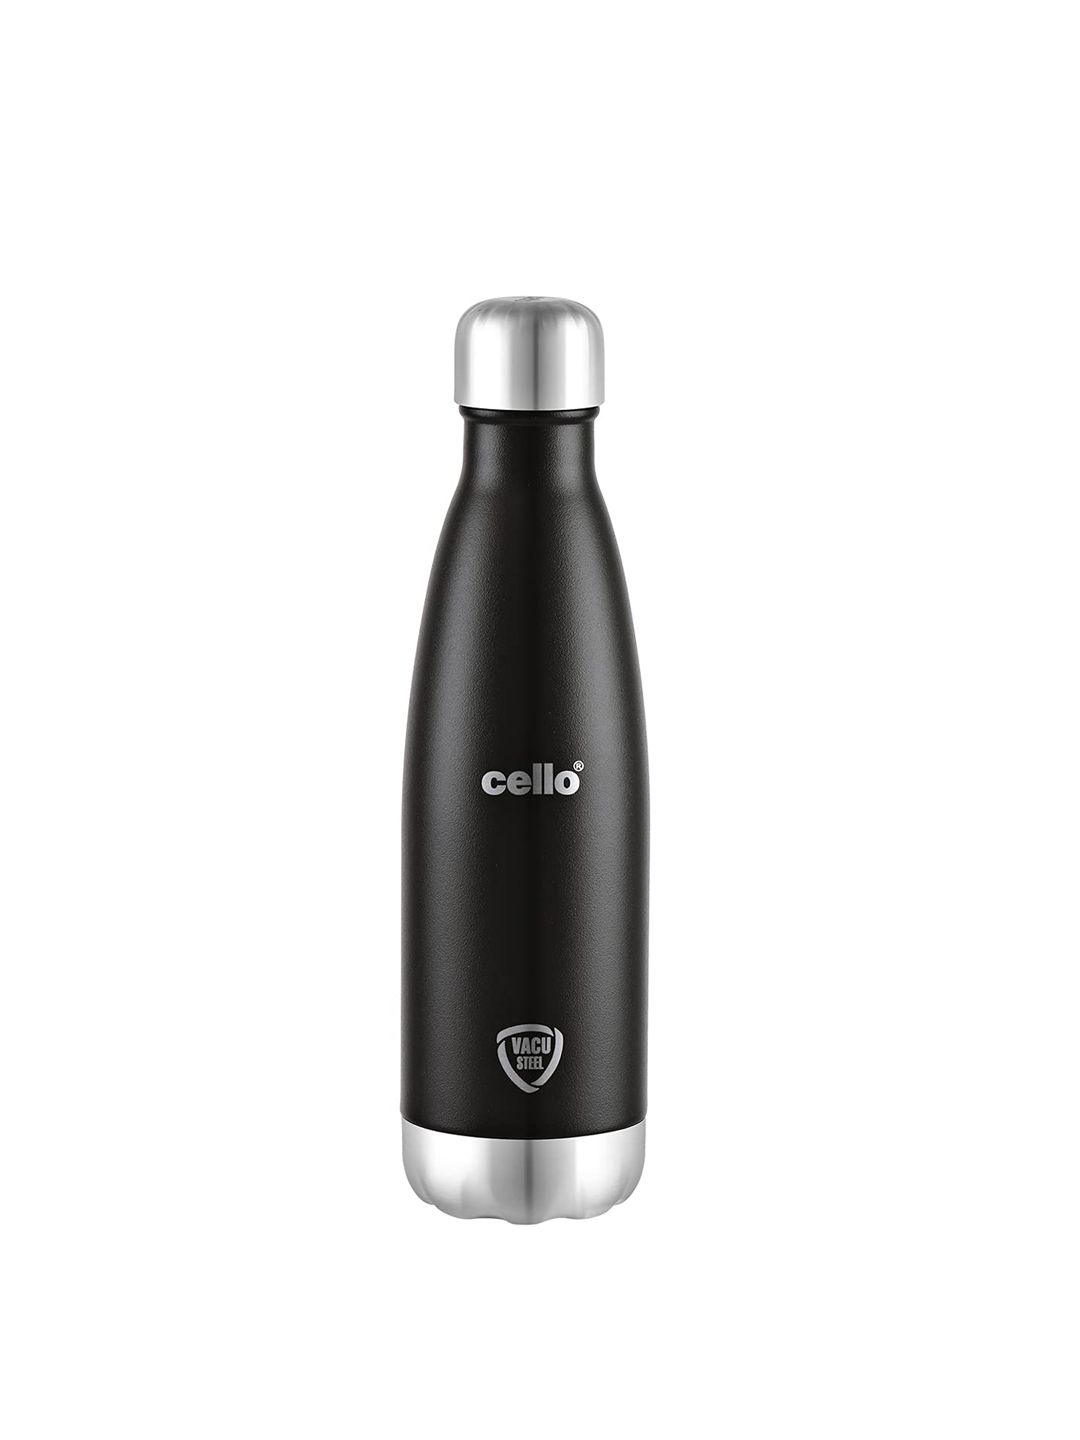 Cello Black Solid Stainless Steel Water Bottle 500 ML Price in India